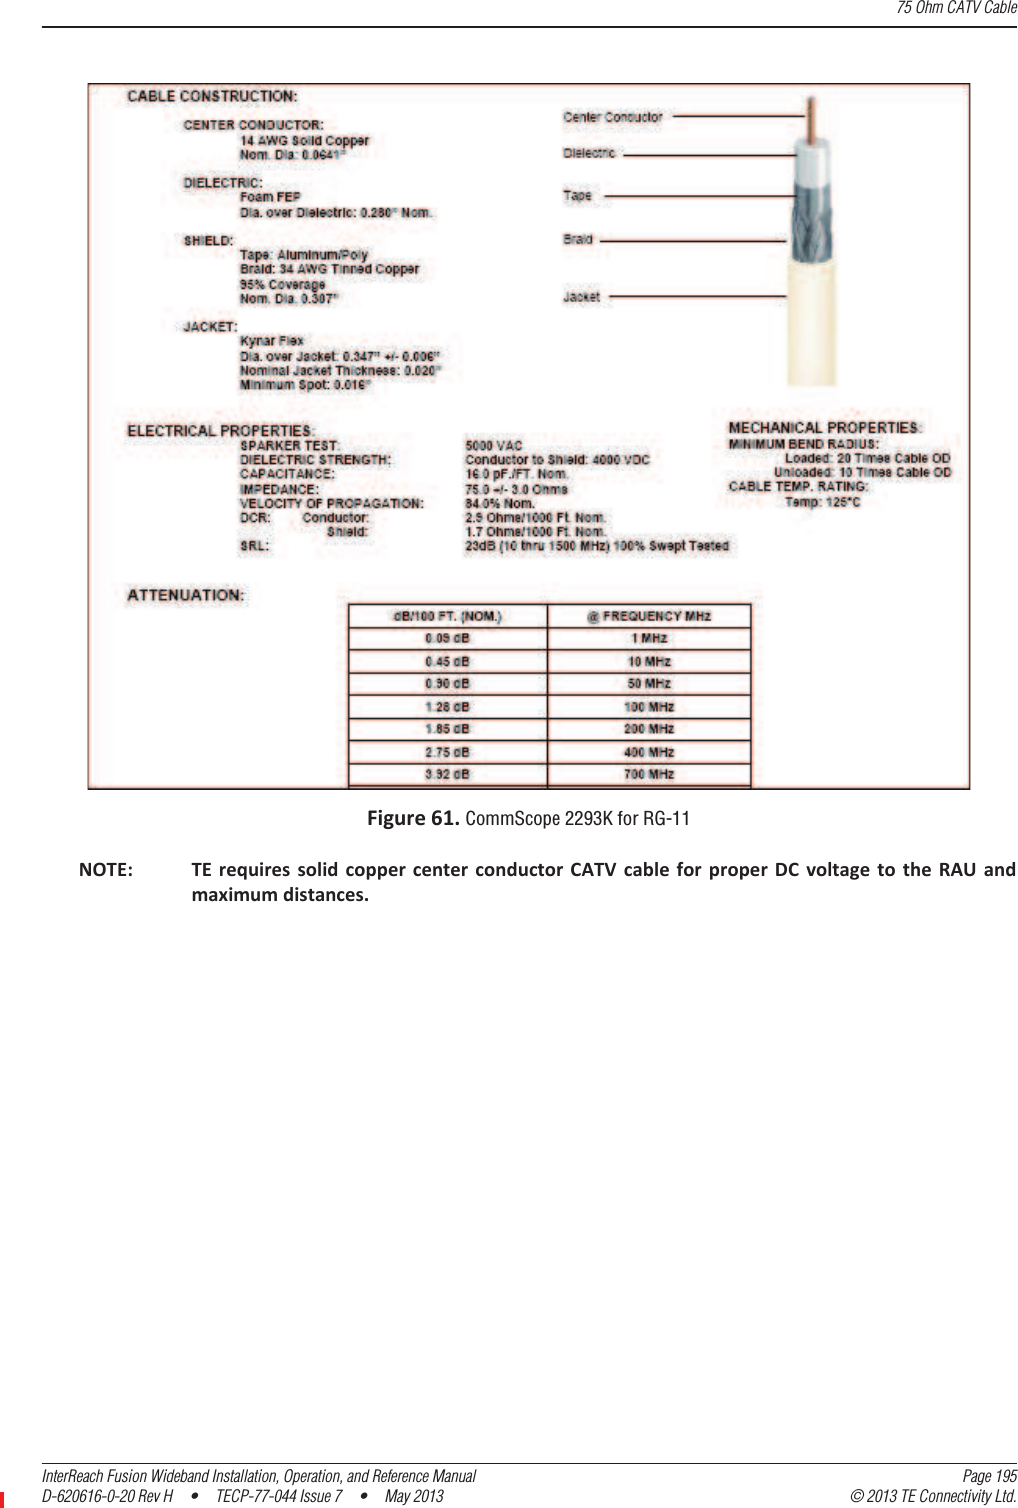 75 Ohm CATV CableInterReach Fusion Wideband Installation, Operation, and Reference Manual Page 195D-620616-0-20 Rev H  •  TECP-77-044 Issue 7  •  May 2013 © 2013 TE Connectivity Ltd.Figure61.CommScope 2293K for RG-11NOTE: TErequiressolidcoppercenterconductorCATVcableforproperDCvoltagetotheRAUandmaximumdistances.